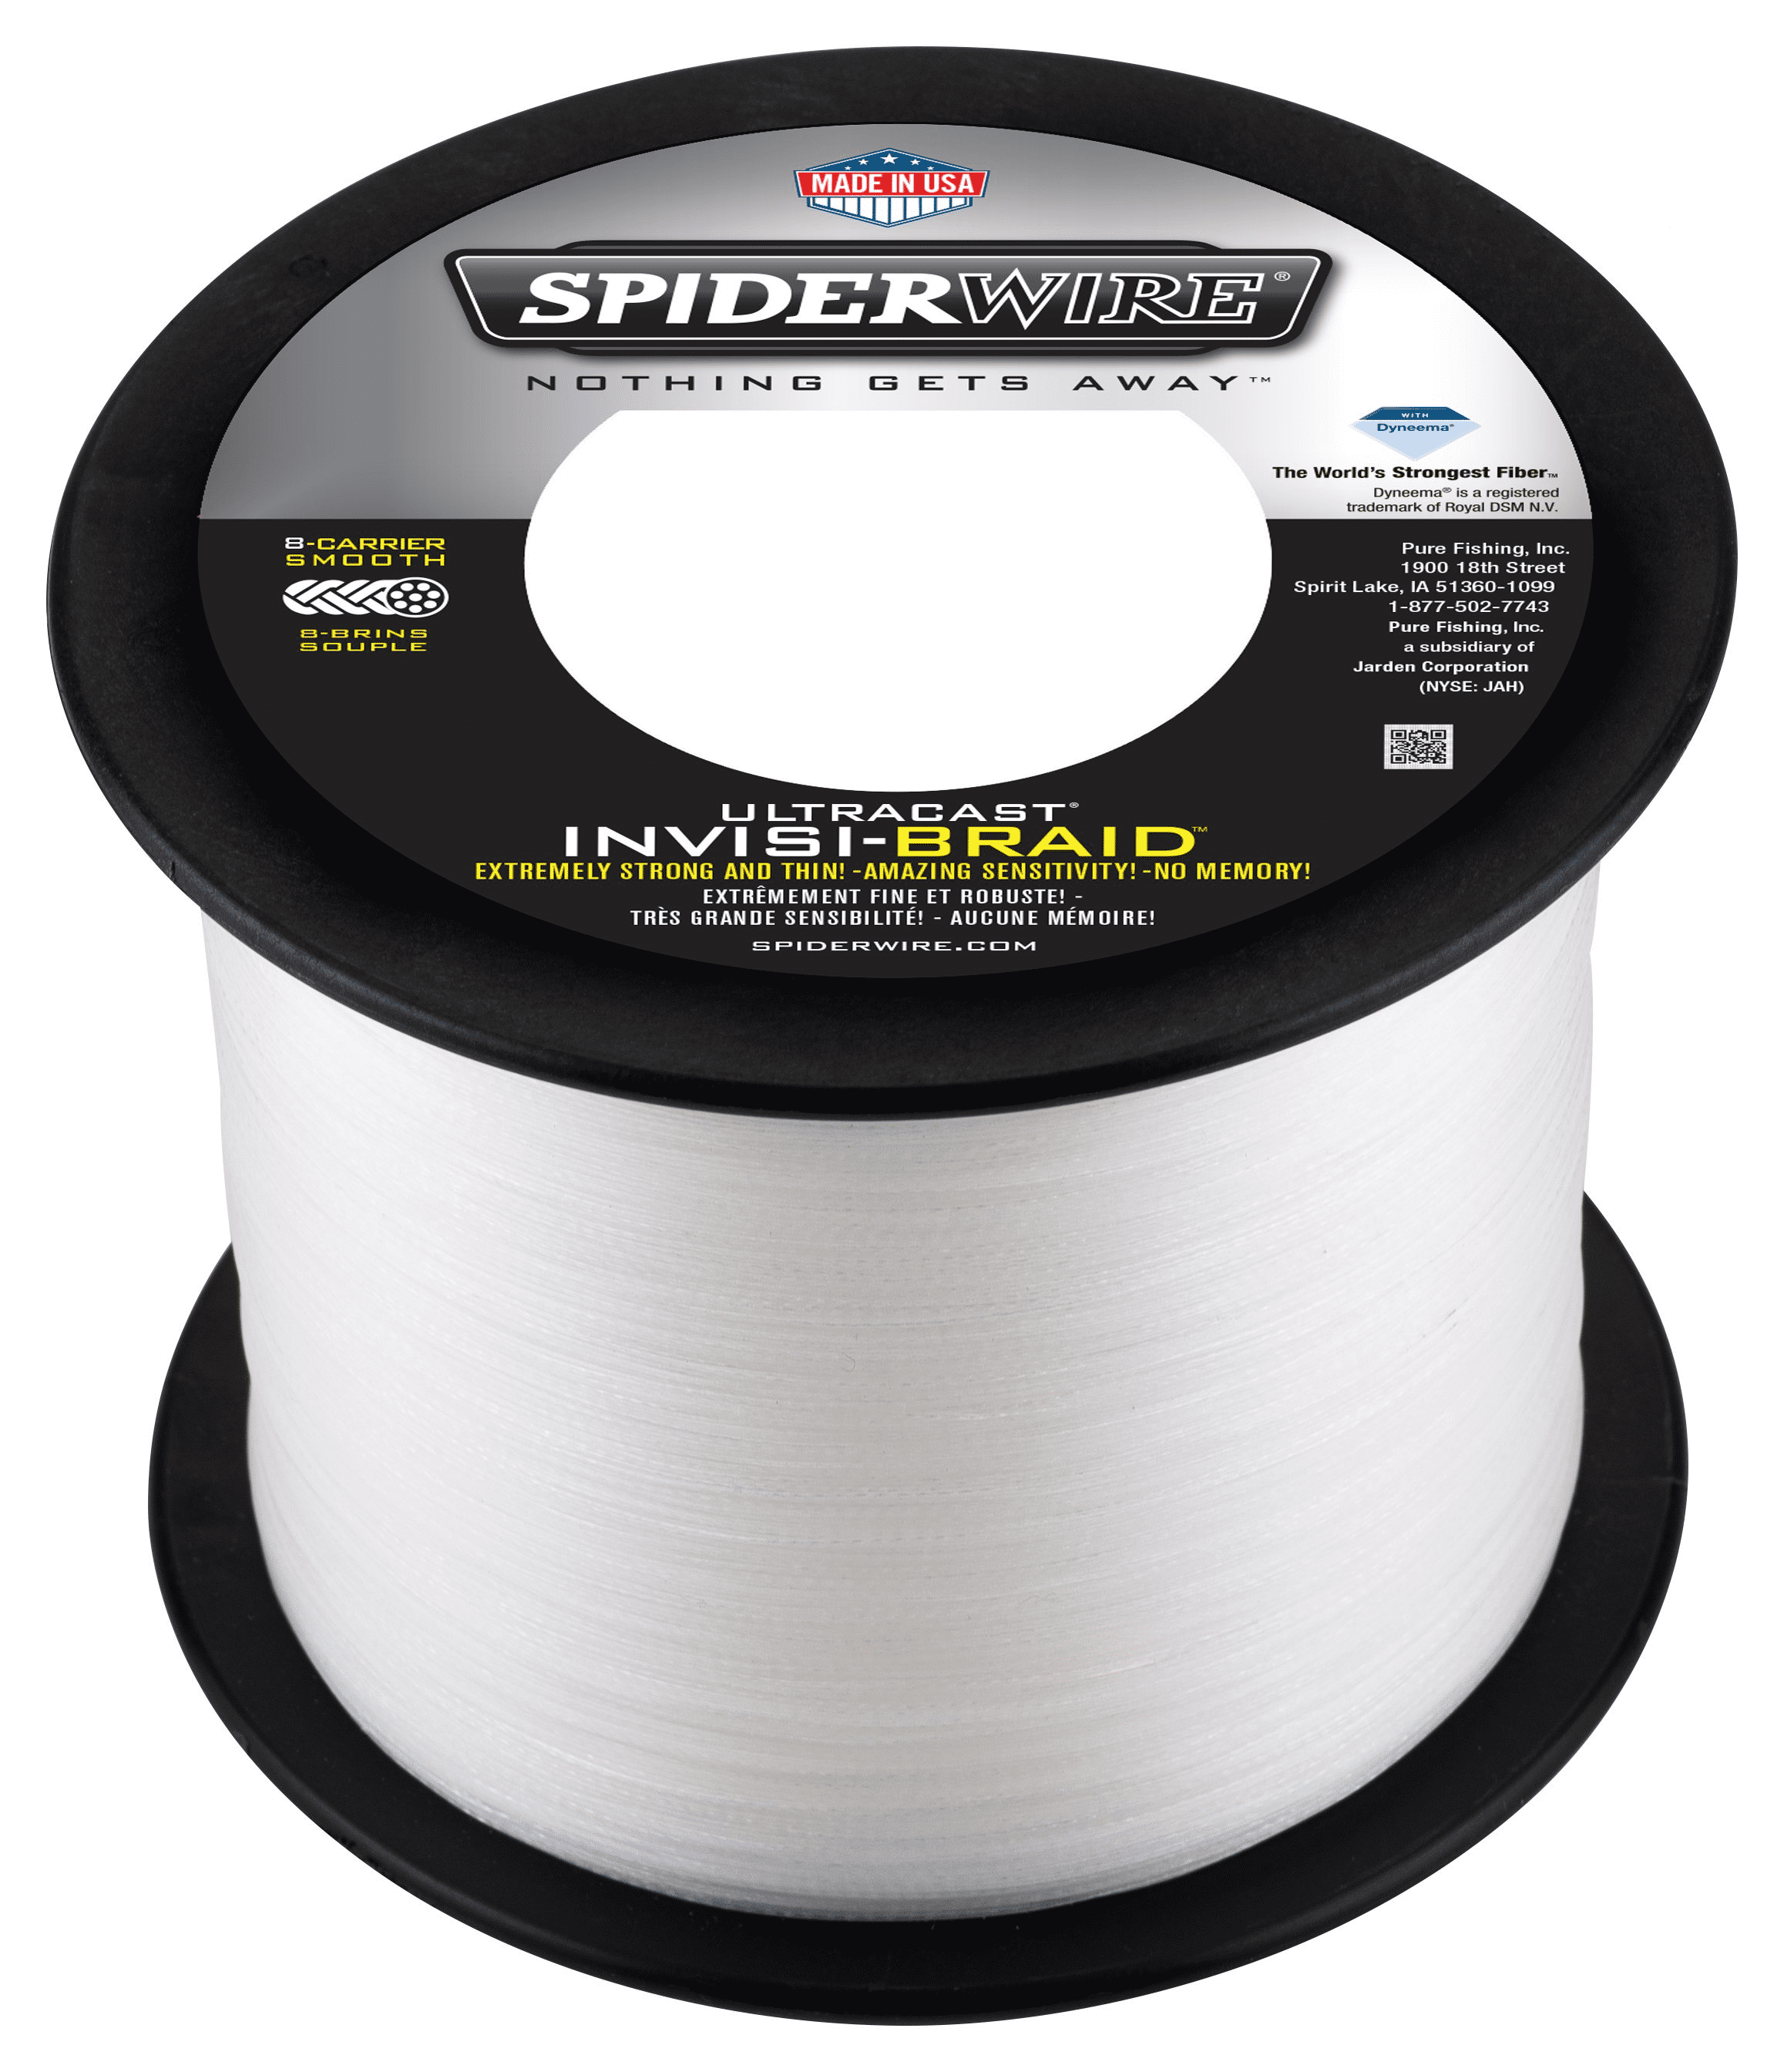 Spider-Line Series 100m PE Braided Fishing Line Camouflag 4 Strands 20-  220LB Multifilament Fishing Line yellow 0.14mm-18LB 